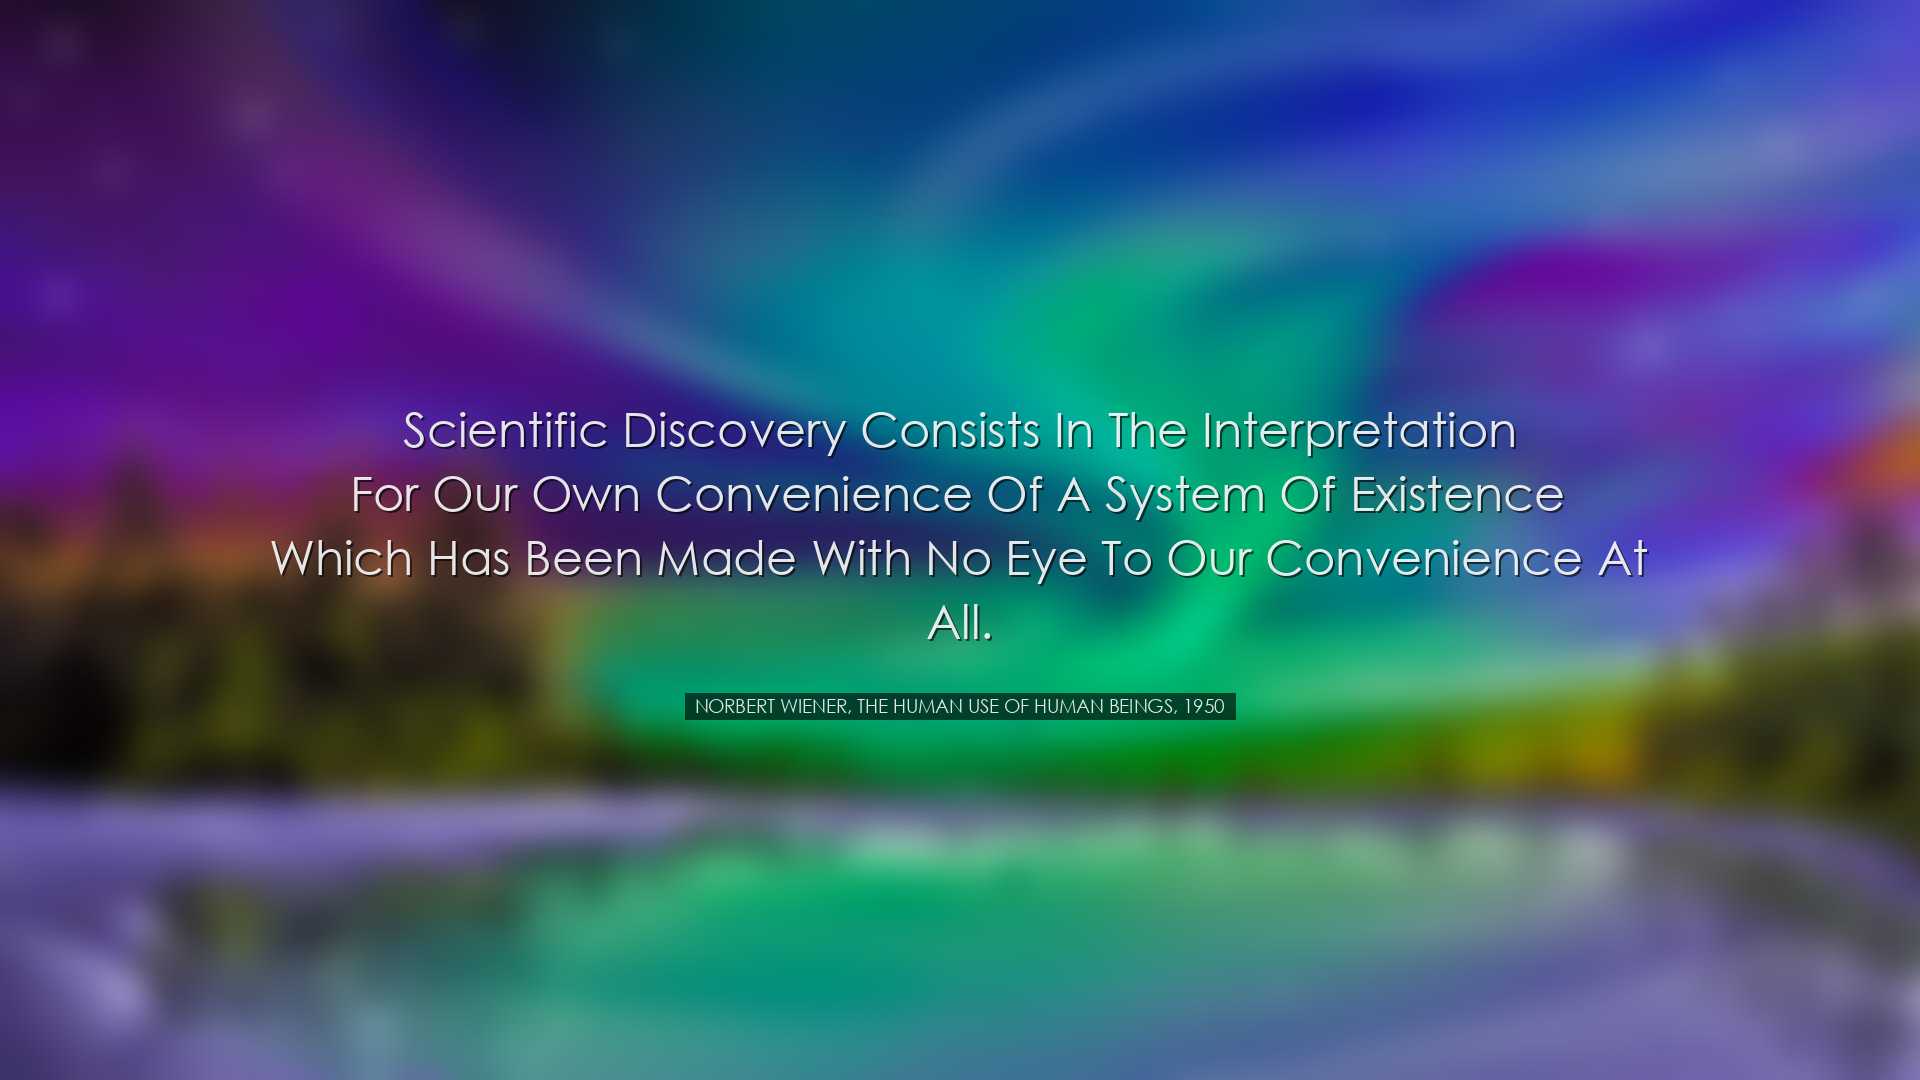 Scientific discovery consists in the interpretation for our own co